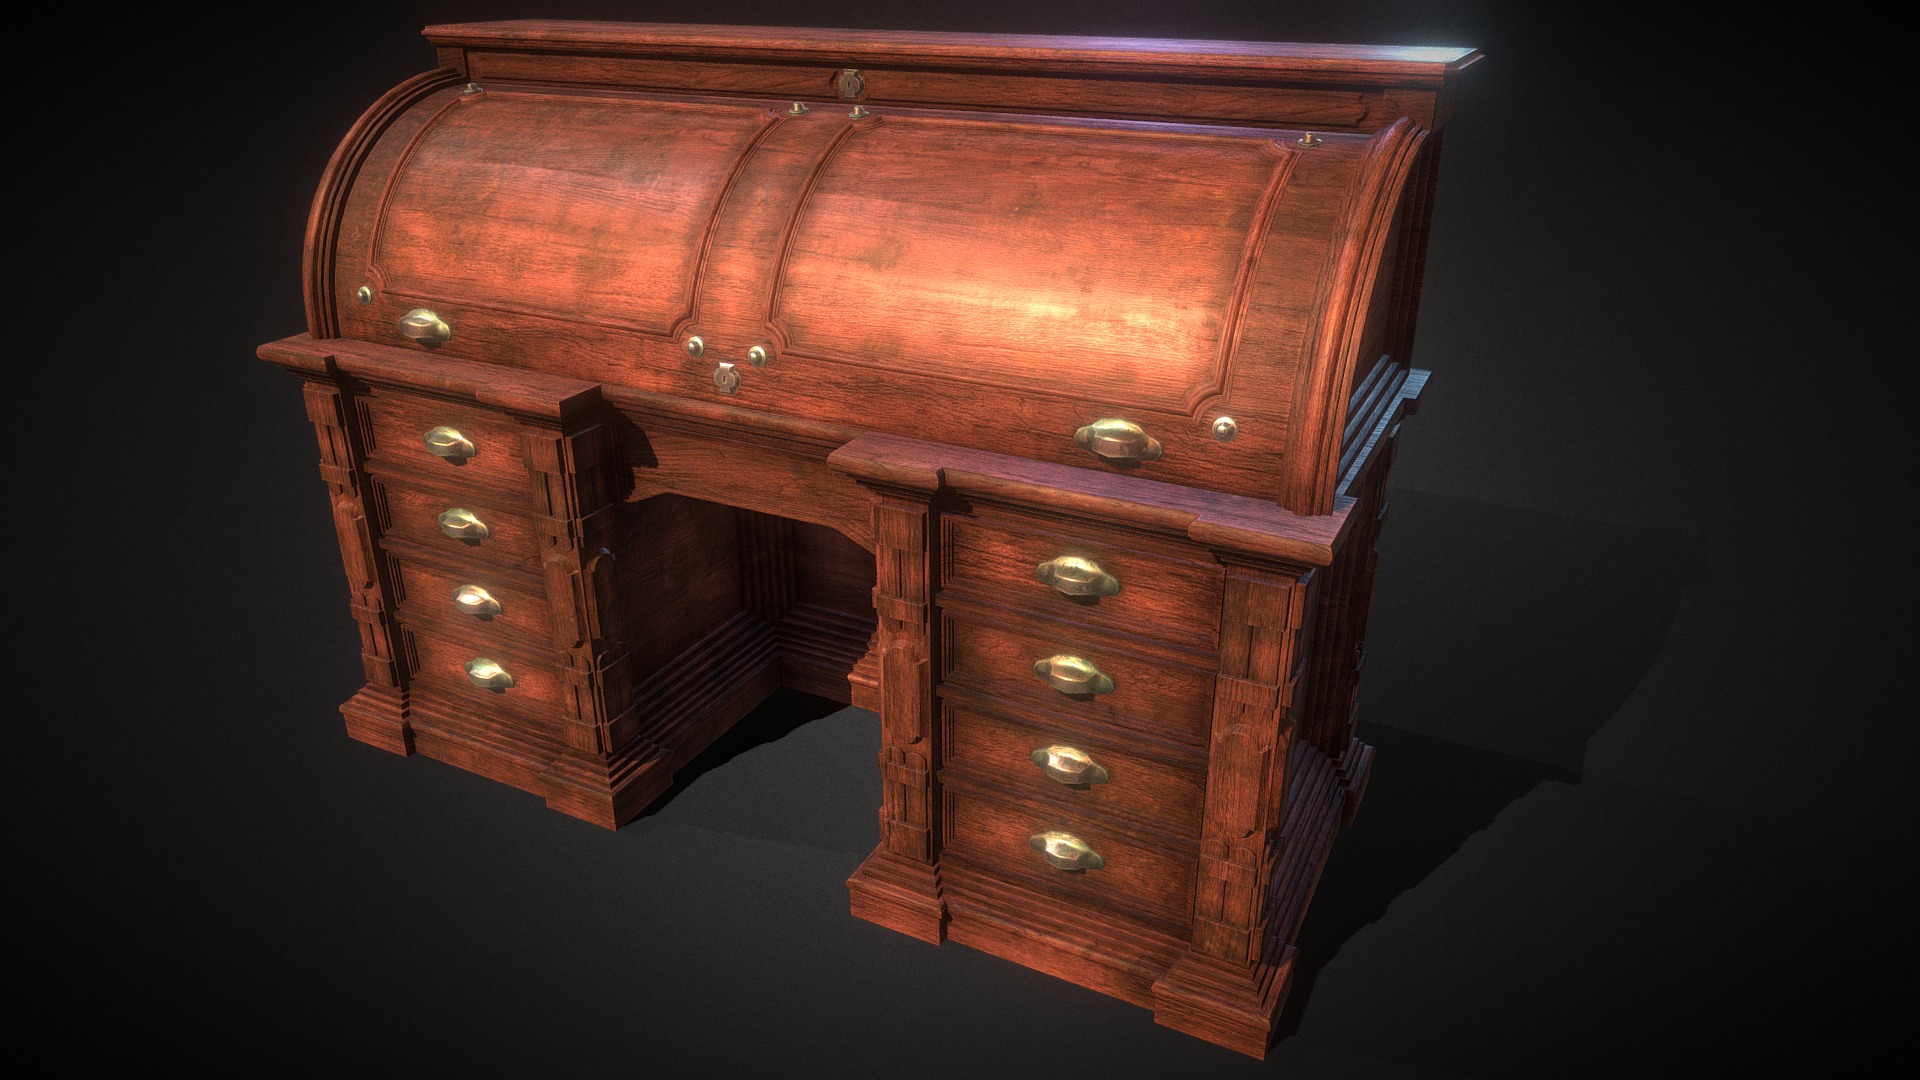 3D model Antique Wooden Desk 001a - This is a 3D model of the Antique Wooden Desk 001a. The 3D model is about a wooden chest of drawers.